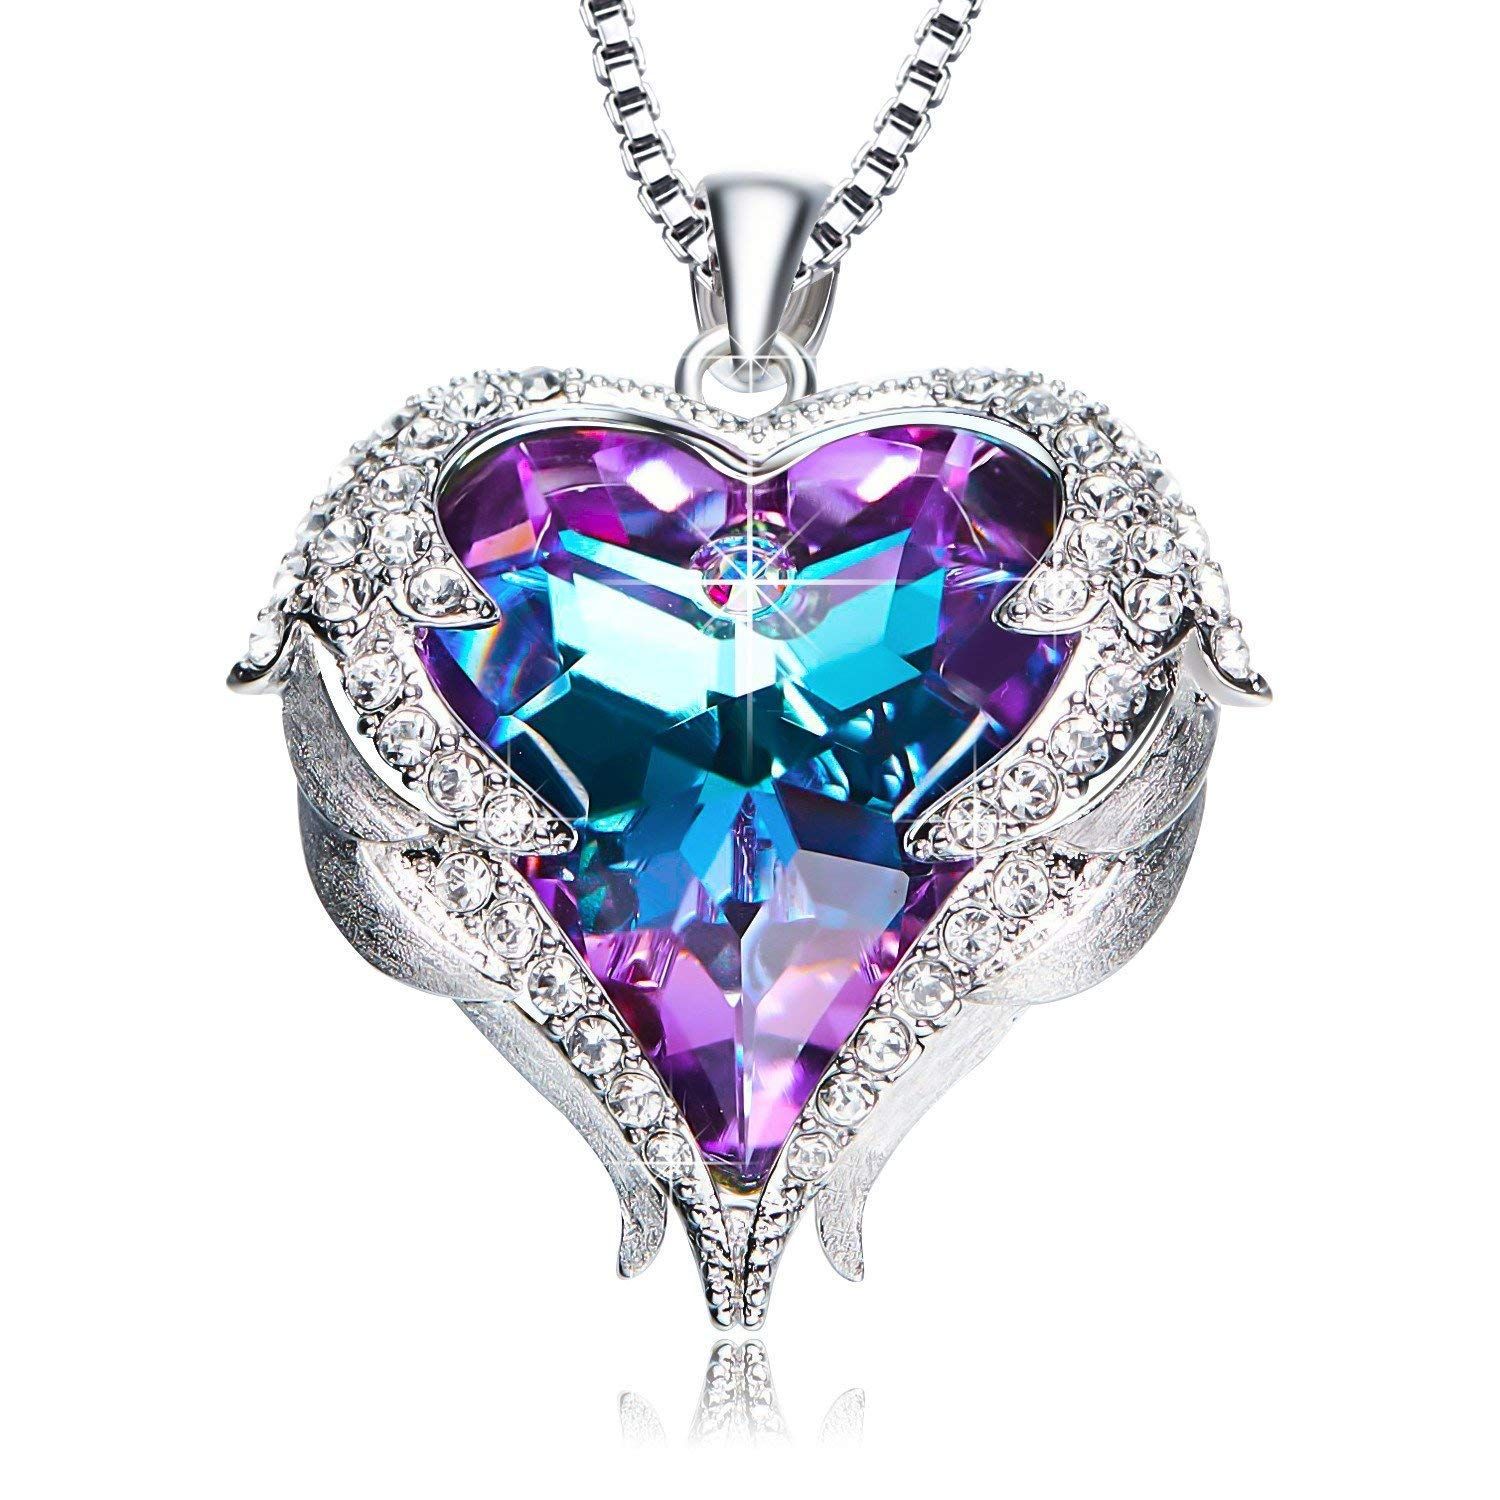 Ancreu Angel Wing Heart Pendant Necklace For Women Made With Swarovski  Crystals With Regard To Most Popular Angel Wing Pendant Necklaces (View 24 of 25)